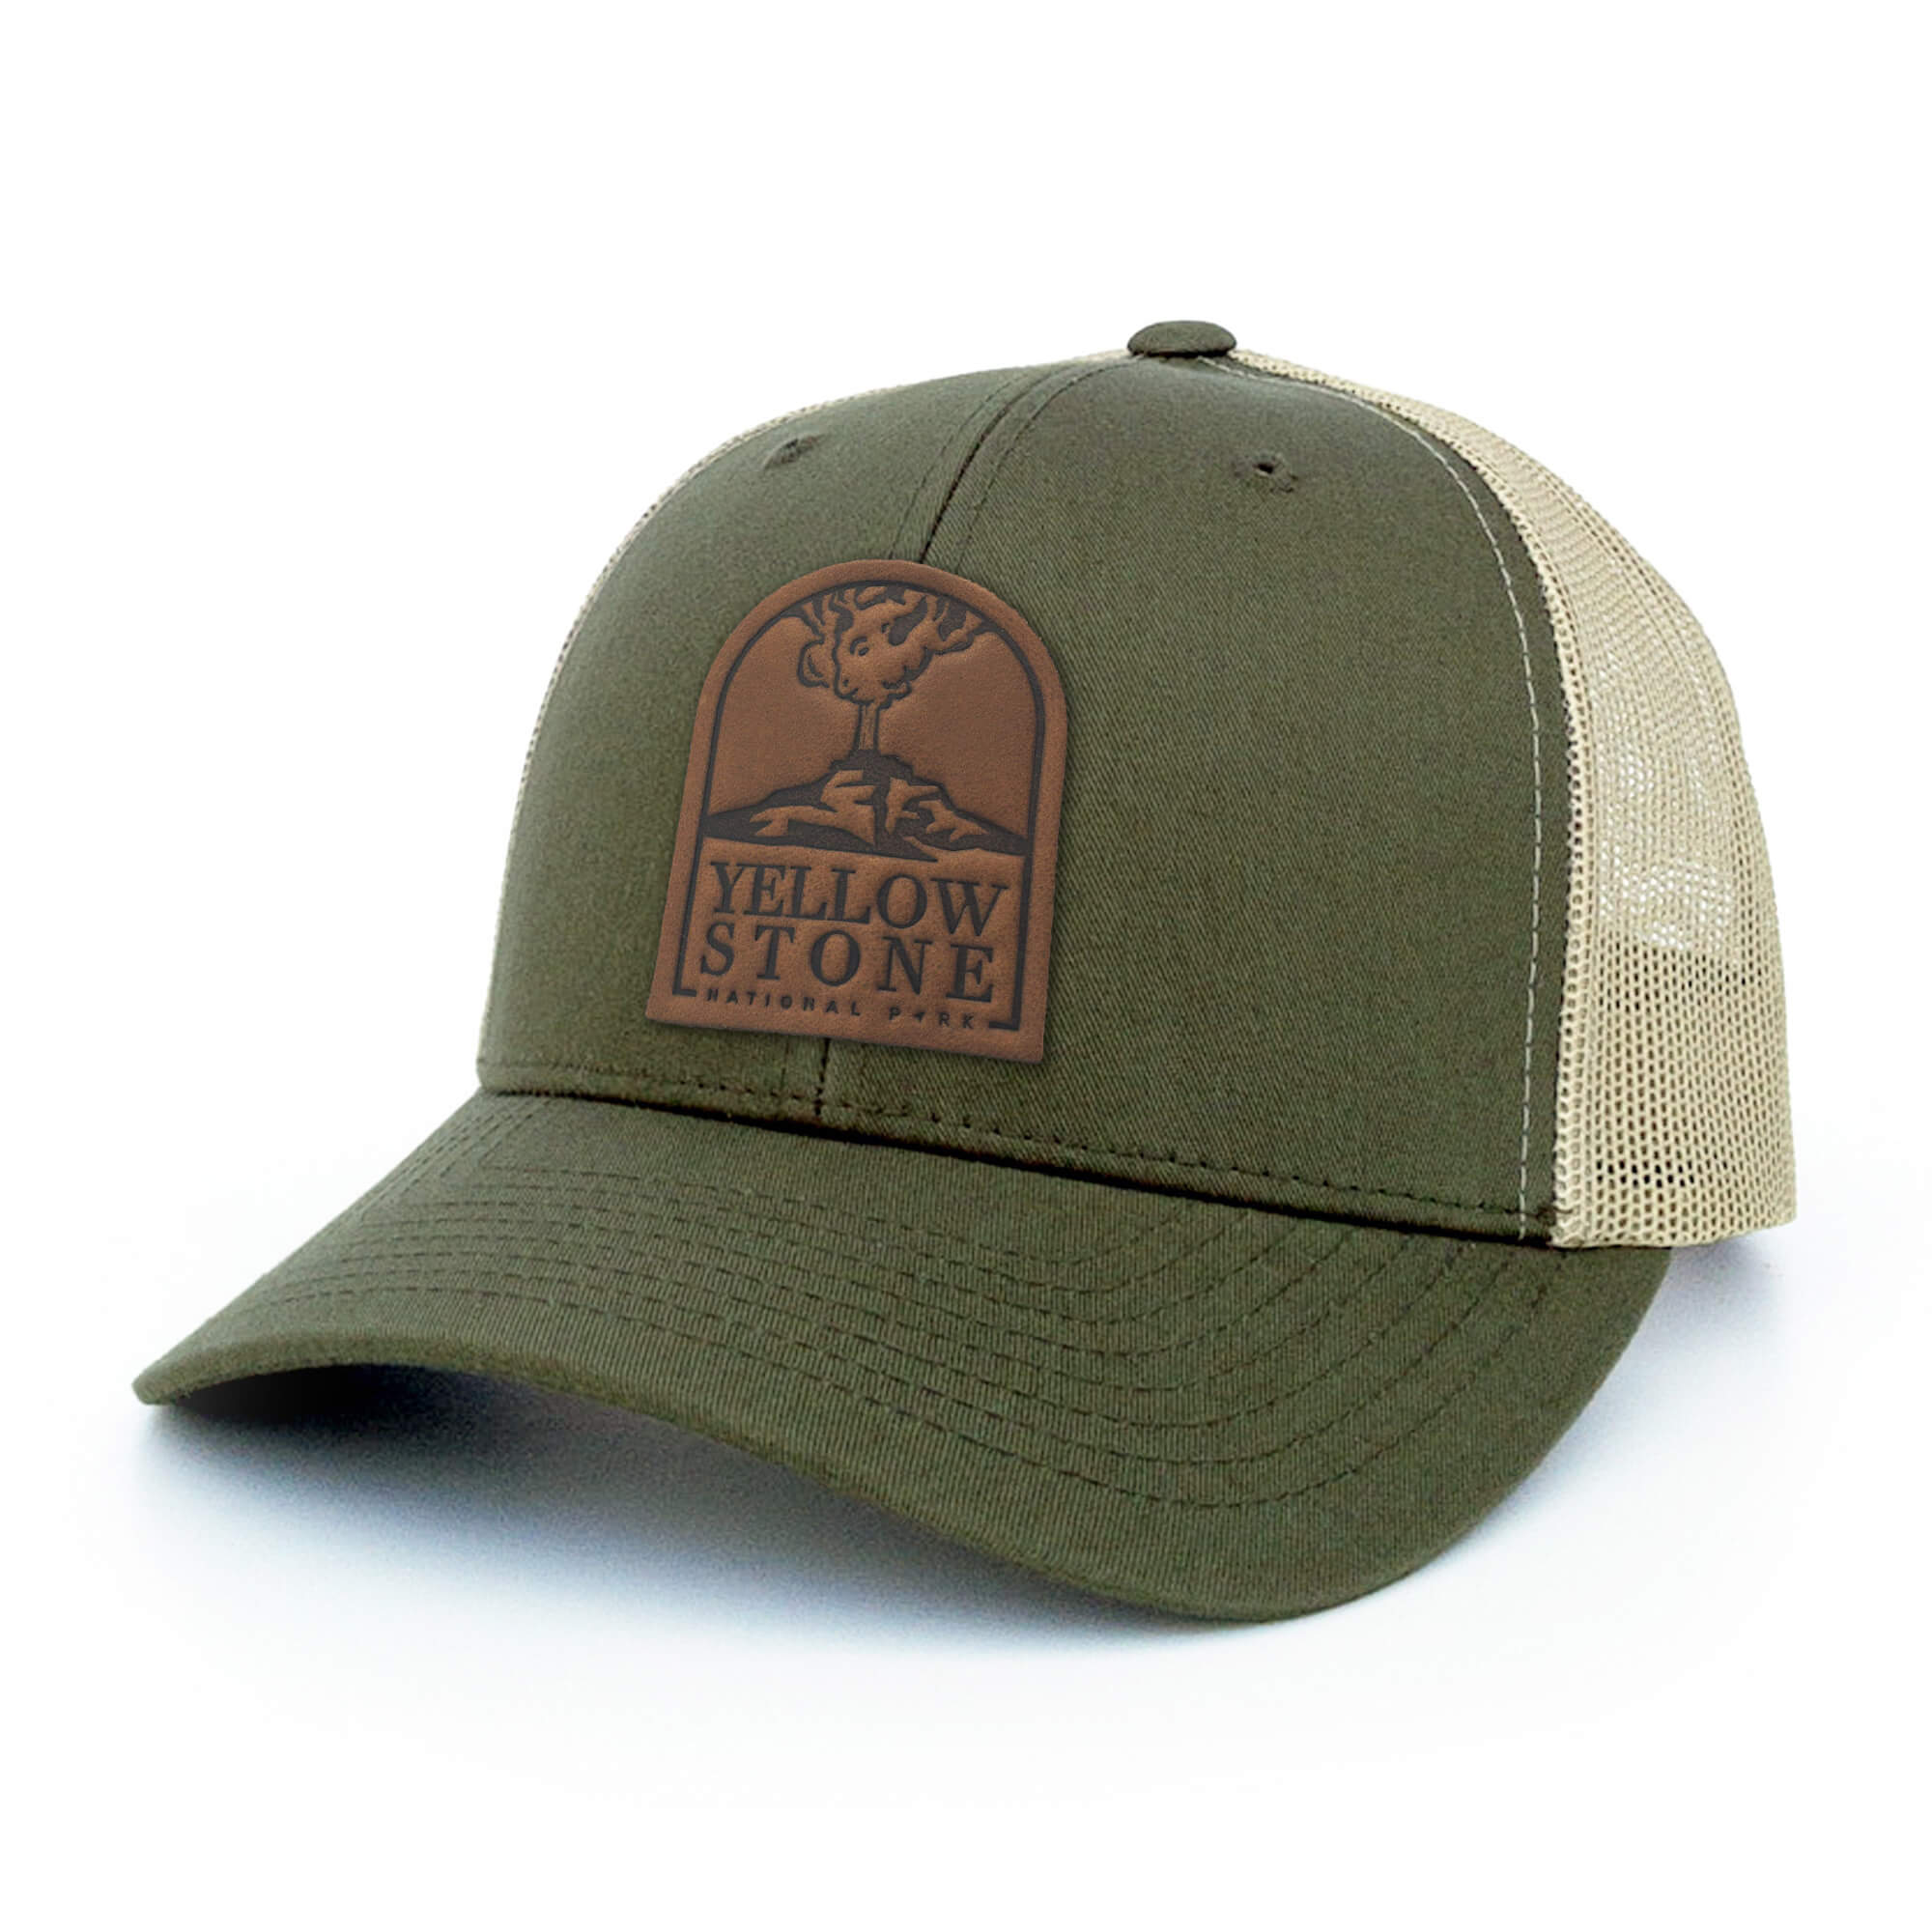 Moss green and khaki trucker hat with full-grain leather patch of Yellowstone National Park | BLACK-007-005, CHARC-007-005, NAVY-007-005, HGREY-007-005, MOSS-007-005, BROWN-007-005